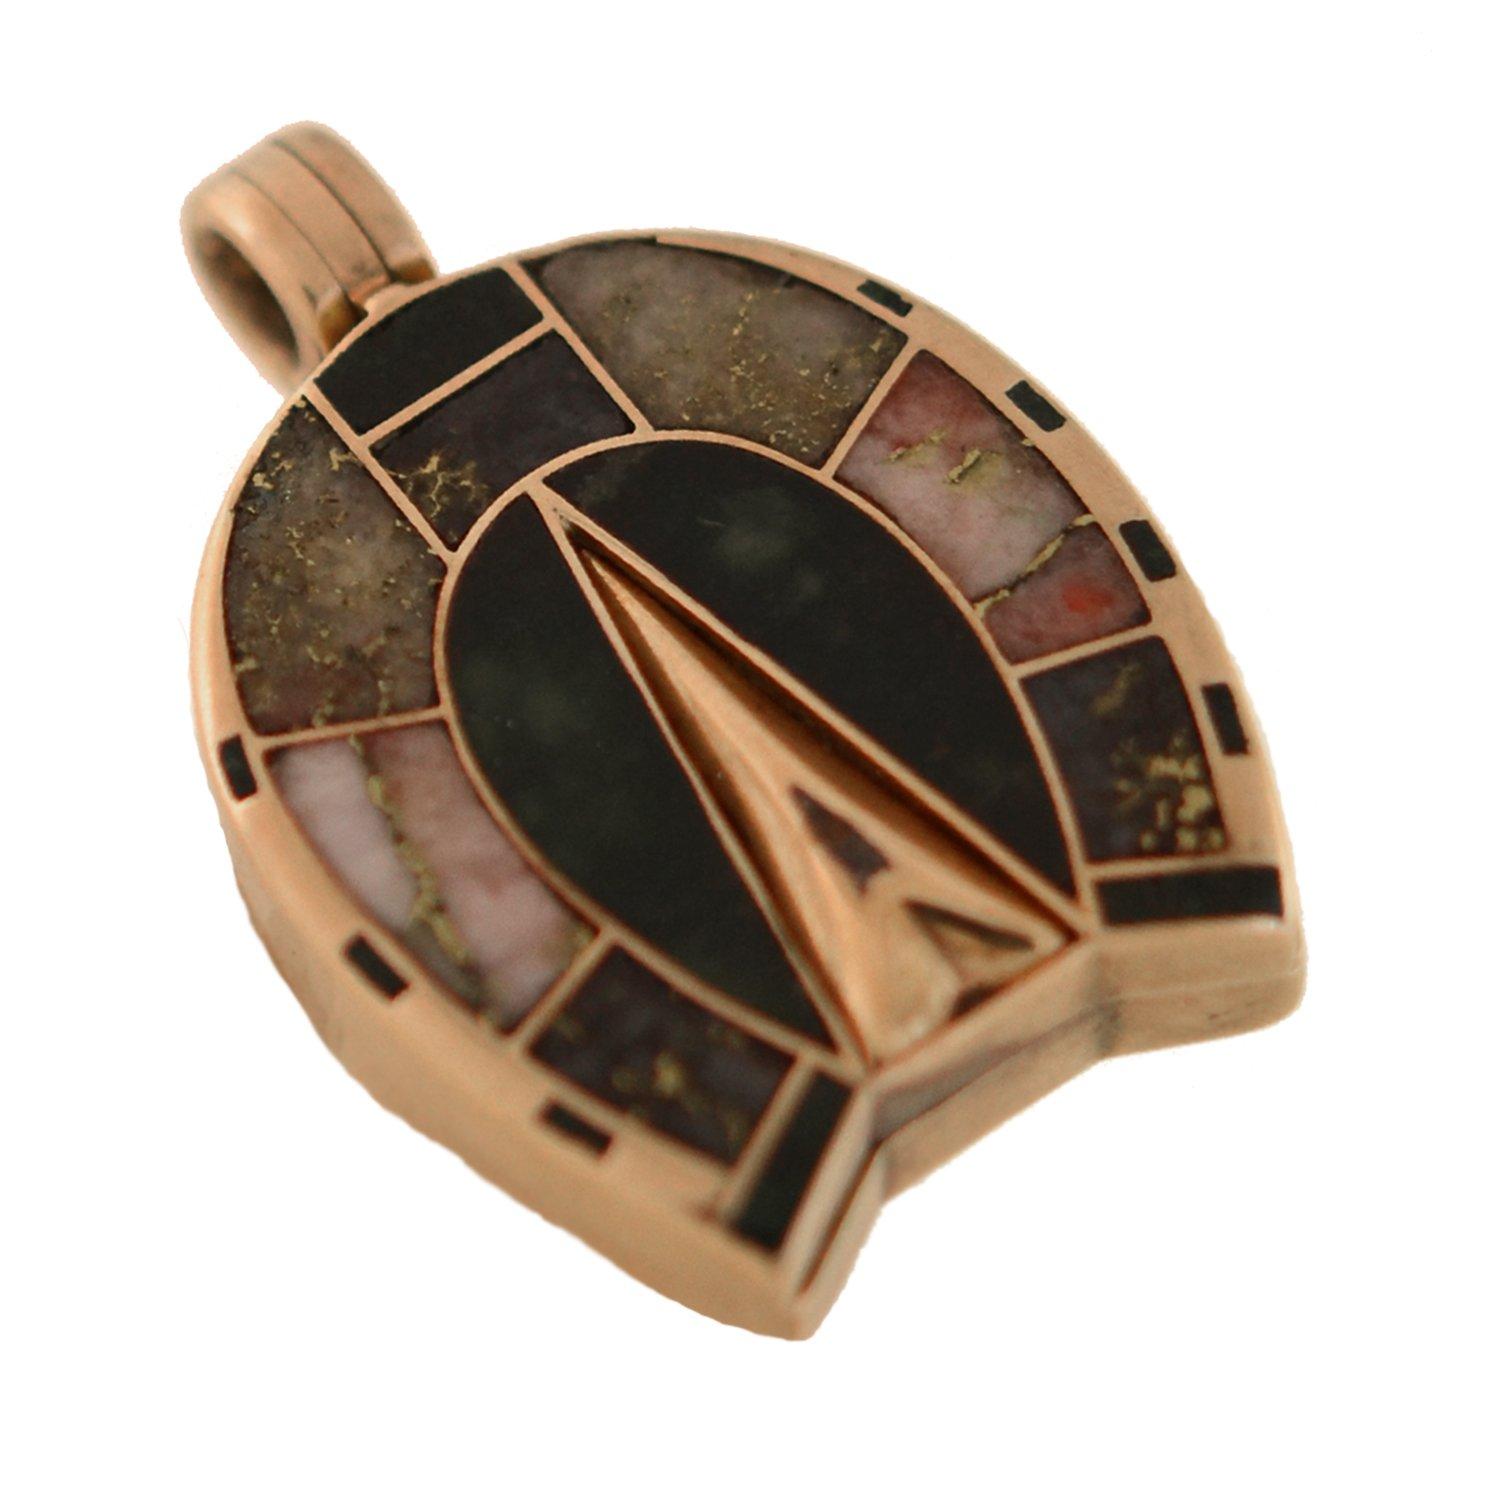 An unusual and gorgeous horseshoe locket pendant from the Victorian (ca1880) era! Crafted in 15kt rosy gold, the surface is adorned with incredible pieces of inlaid gold quartz and agate stones. Included in the ensemble of stones are varying shades